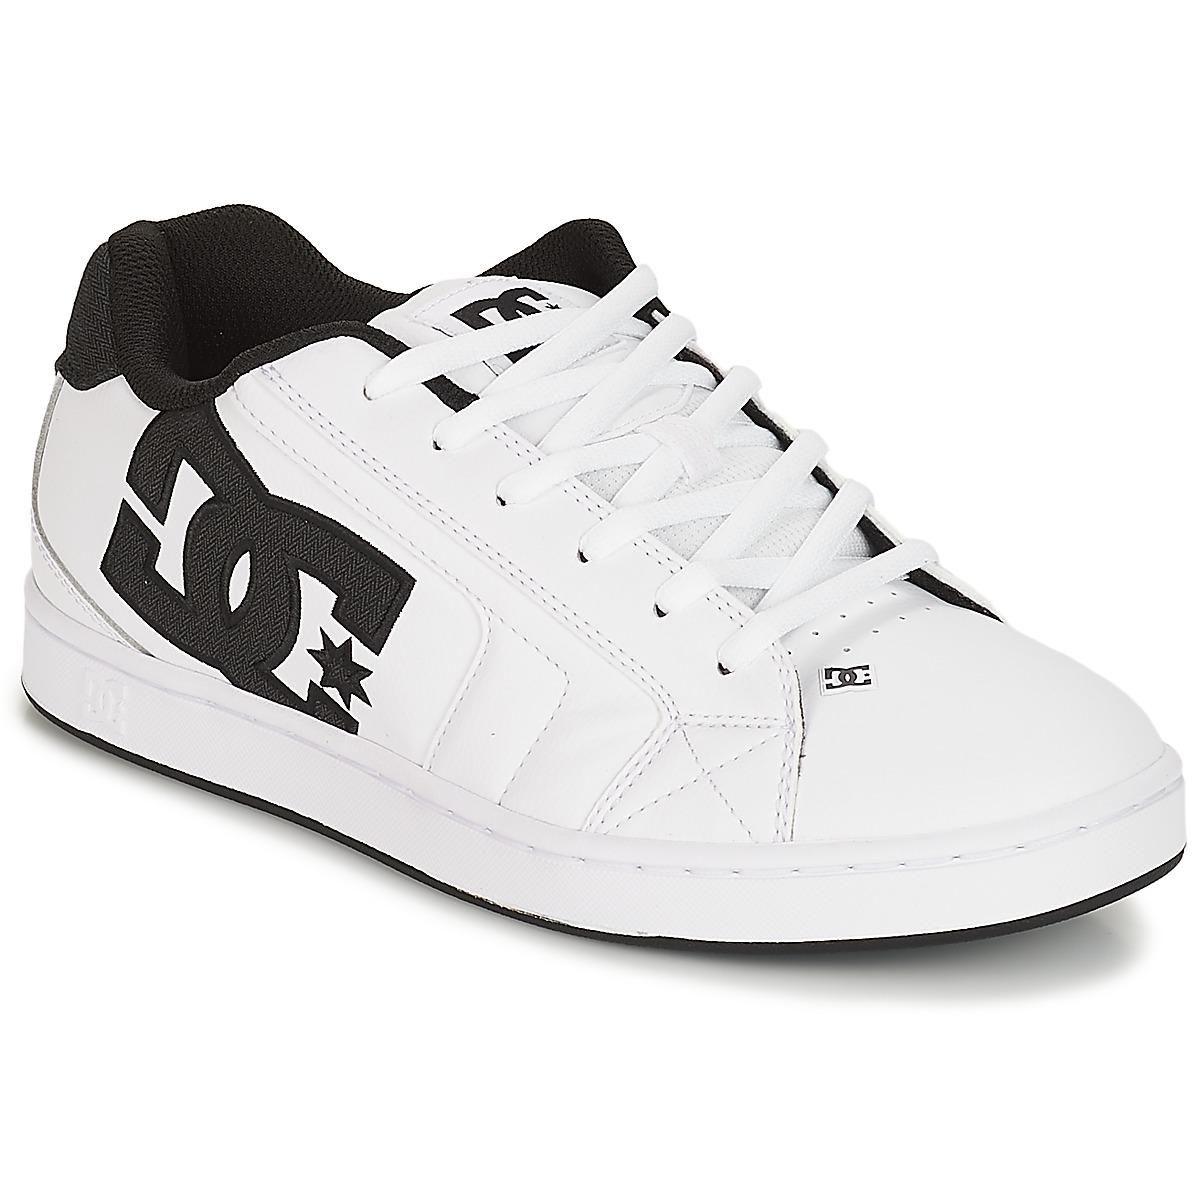 Black and White DC Shoes Logo - Dc Shoes Net Se M Shoe Xwwk Men's Skate Shoes (trainers) In White in ...